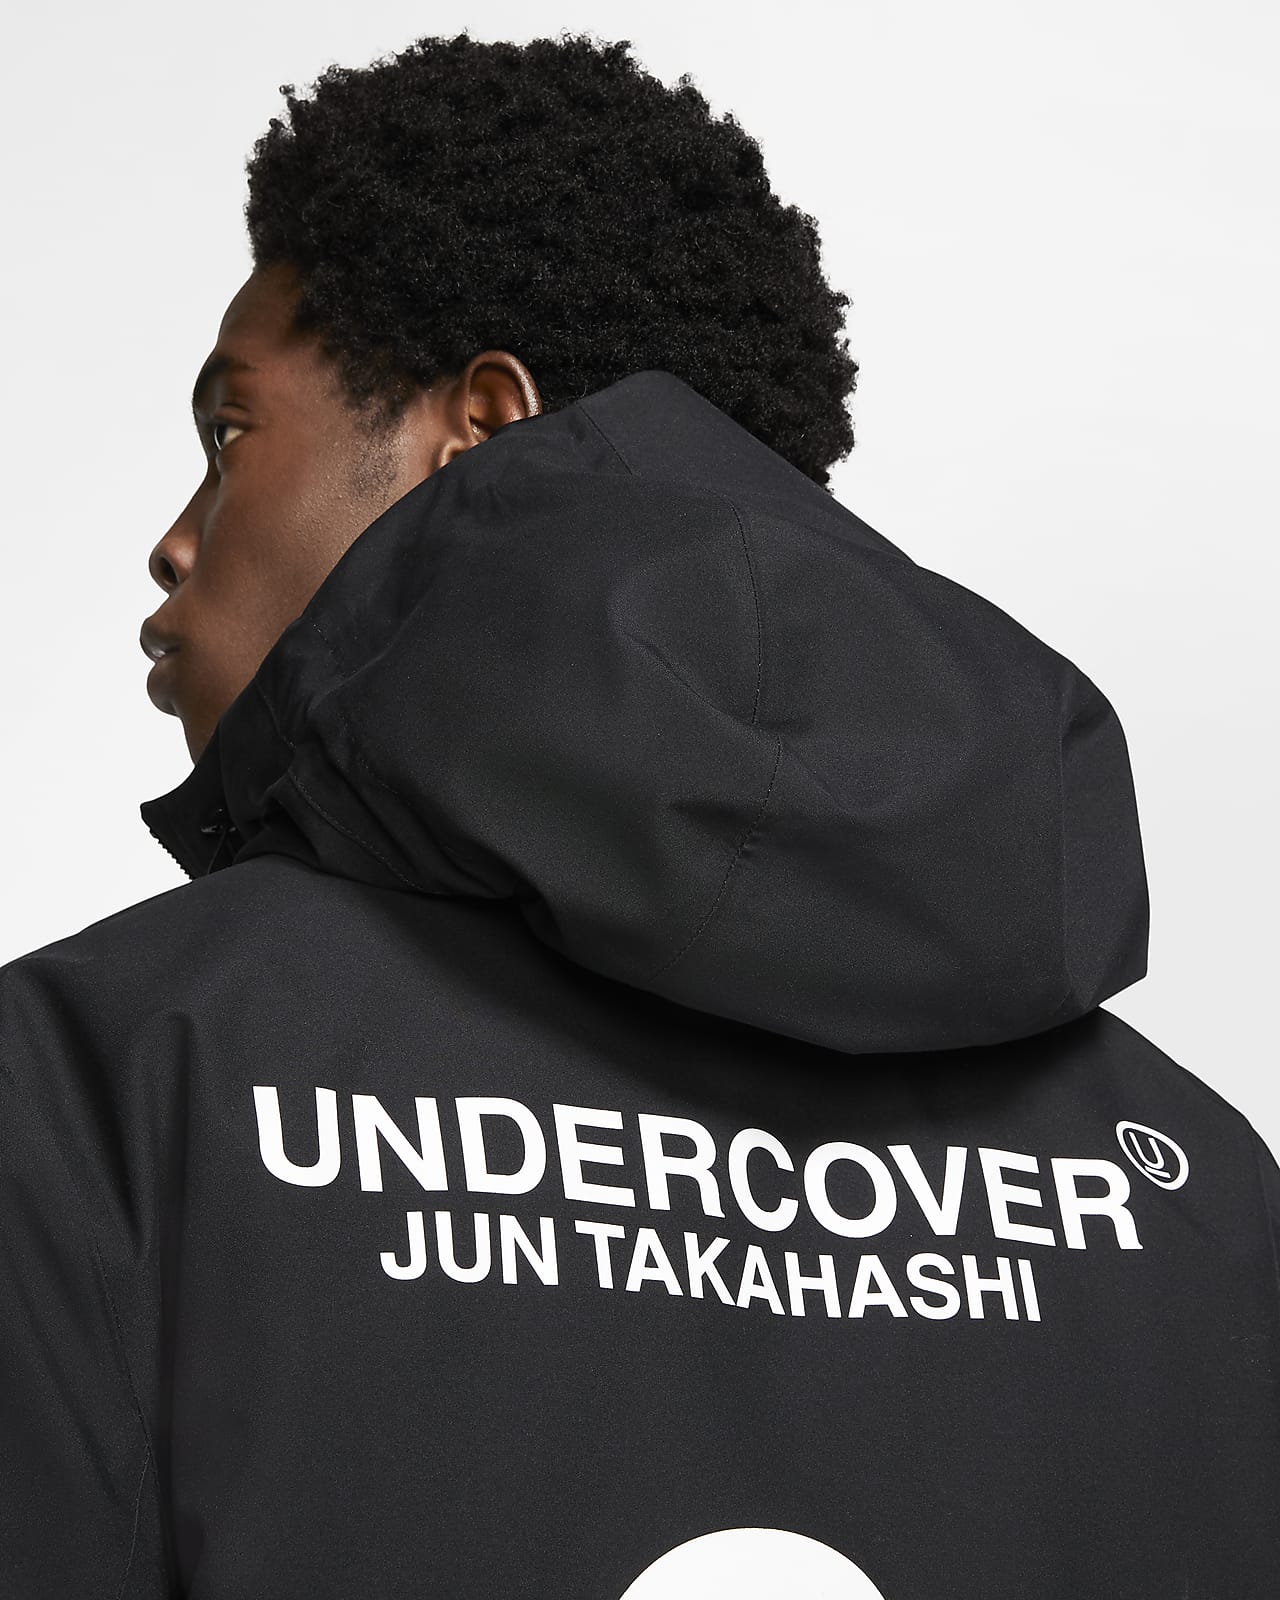 undercover x nike parka